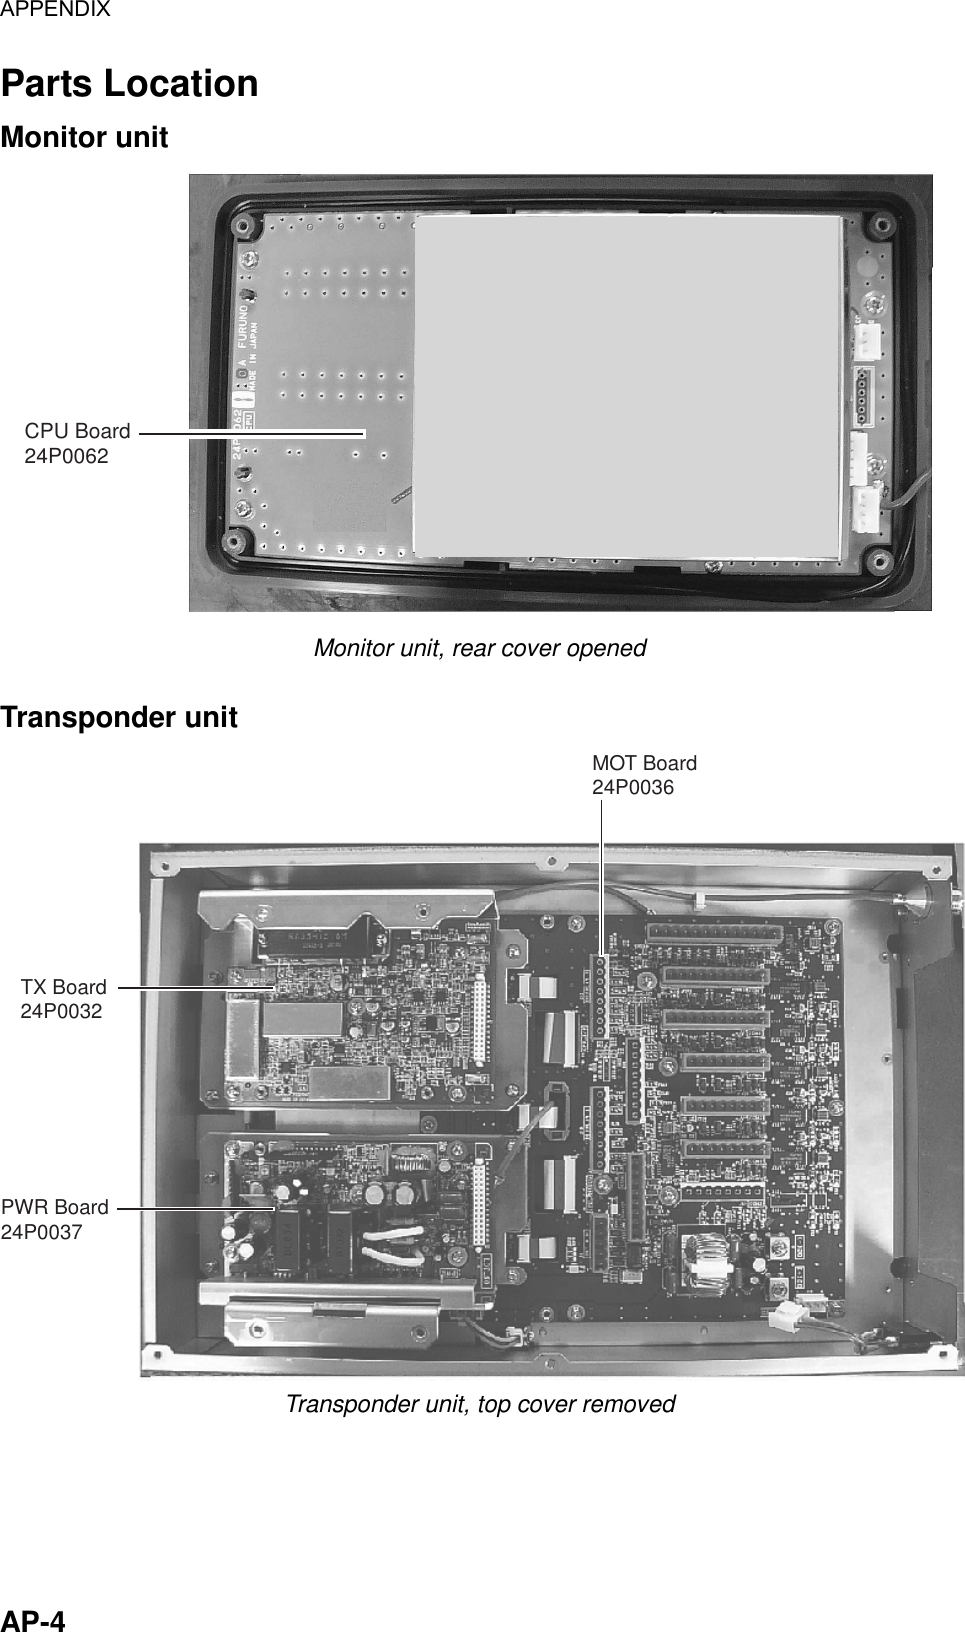 APPENDIX  AP-4 Parts Location Monitor unit CPU Board24P0062 Monitor unit, rear cover opened  Transponder unit TX Board24P0032PWR Board24P0037MOT Board24P0036 Transponder unit, top cover removed 